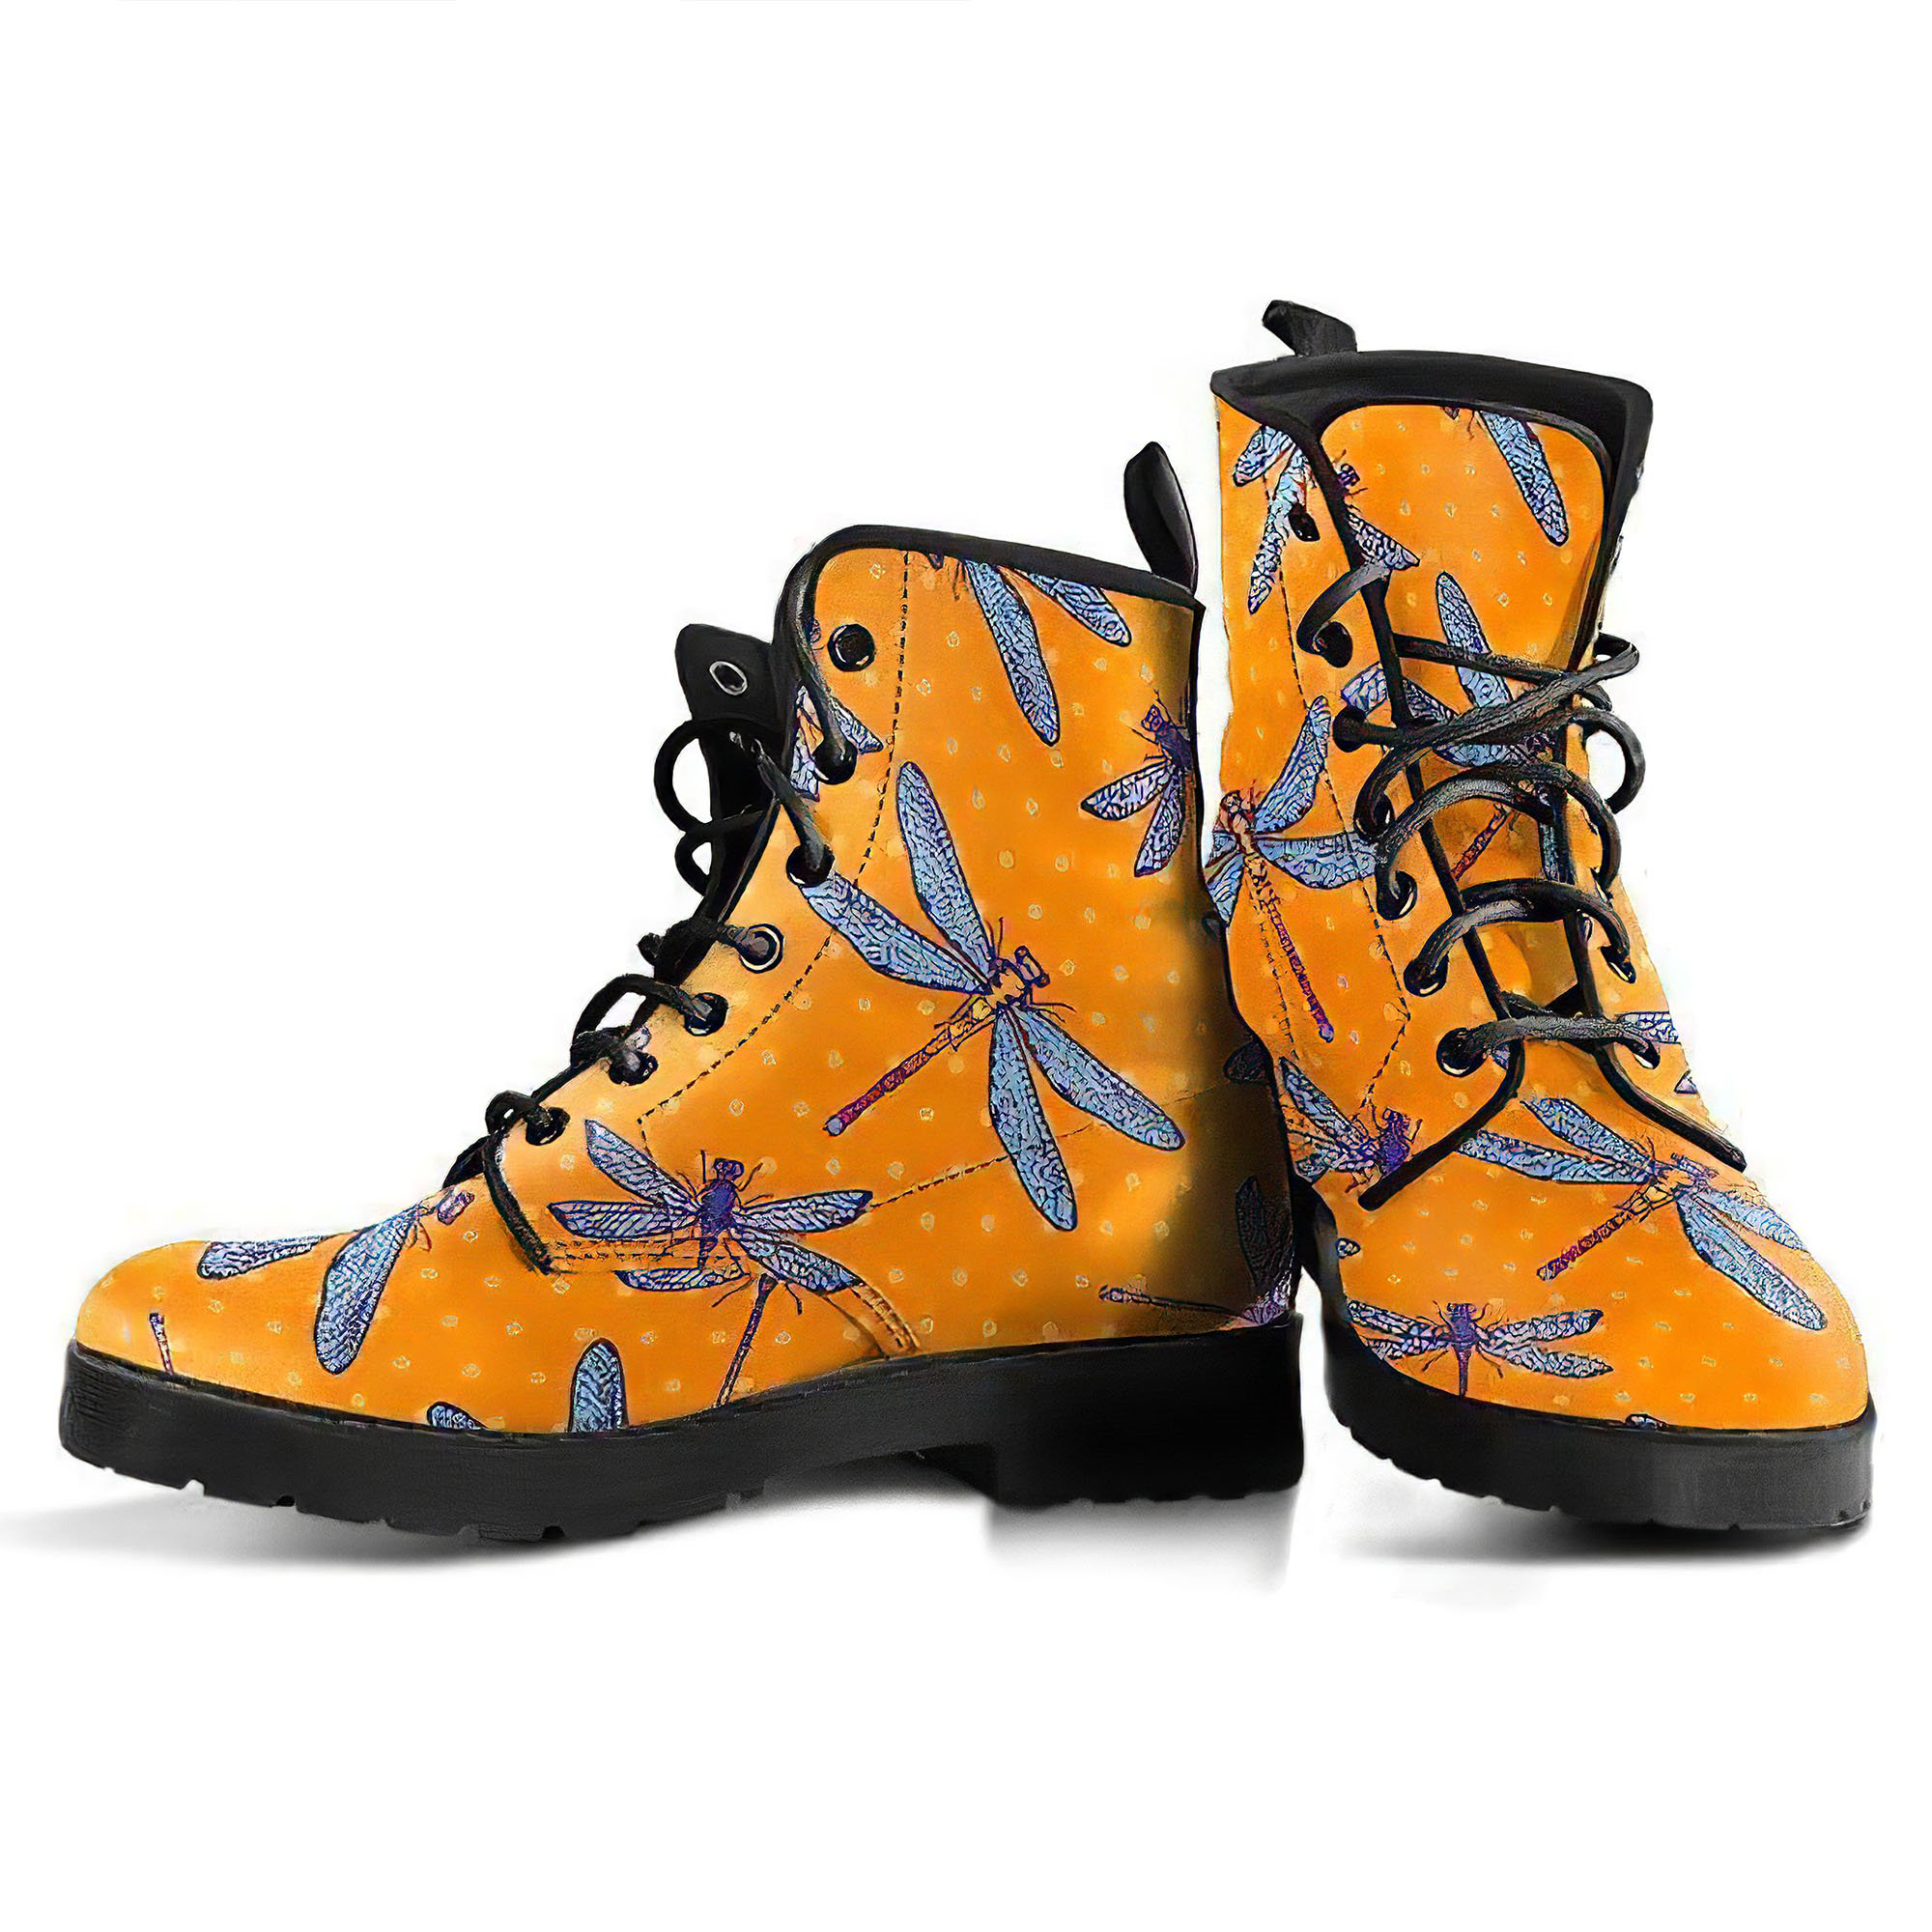 dragonfly-2-handcrafted-boots-gp-main.jpg